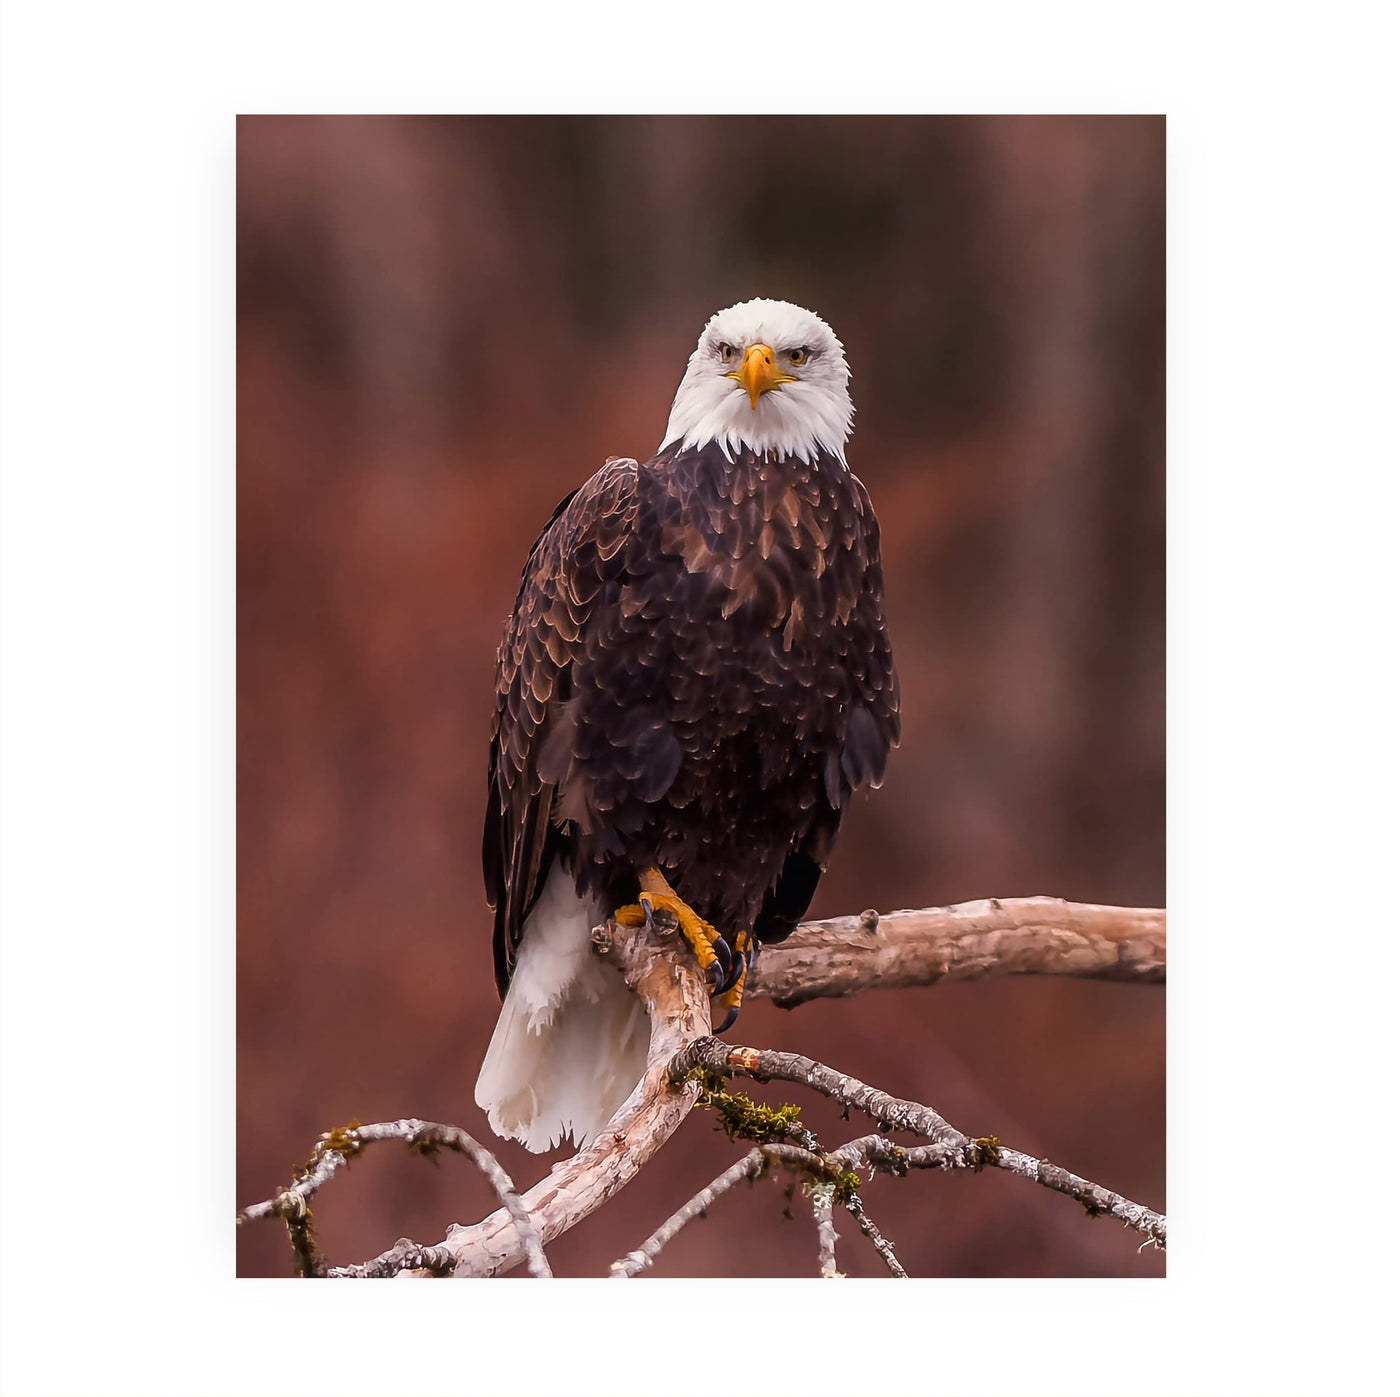 Mighty Bald Eagle in Tree Motivational American Wall Art -8 x 10" Patriotic Eagle Photo Print -Ready to Frame. Inspirational Home-Office-School-Cave Decor. Great for Animal & Political Themes!